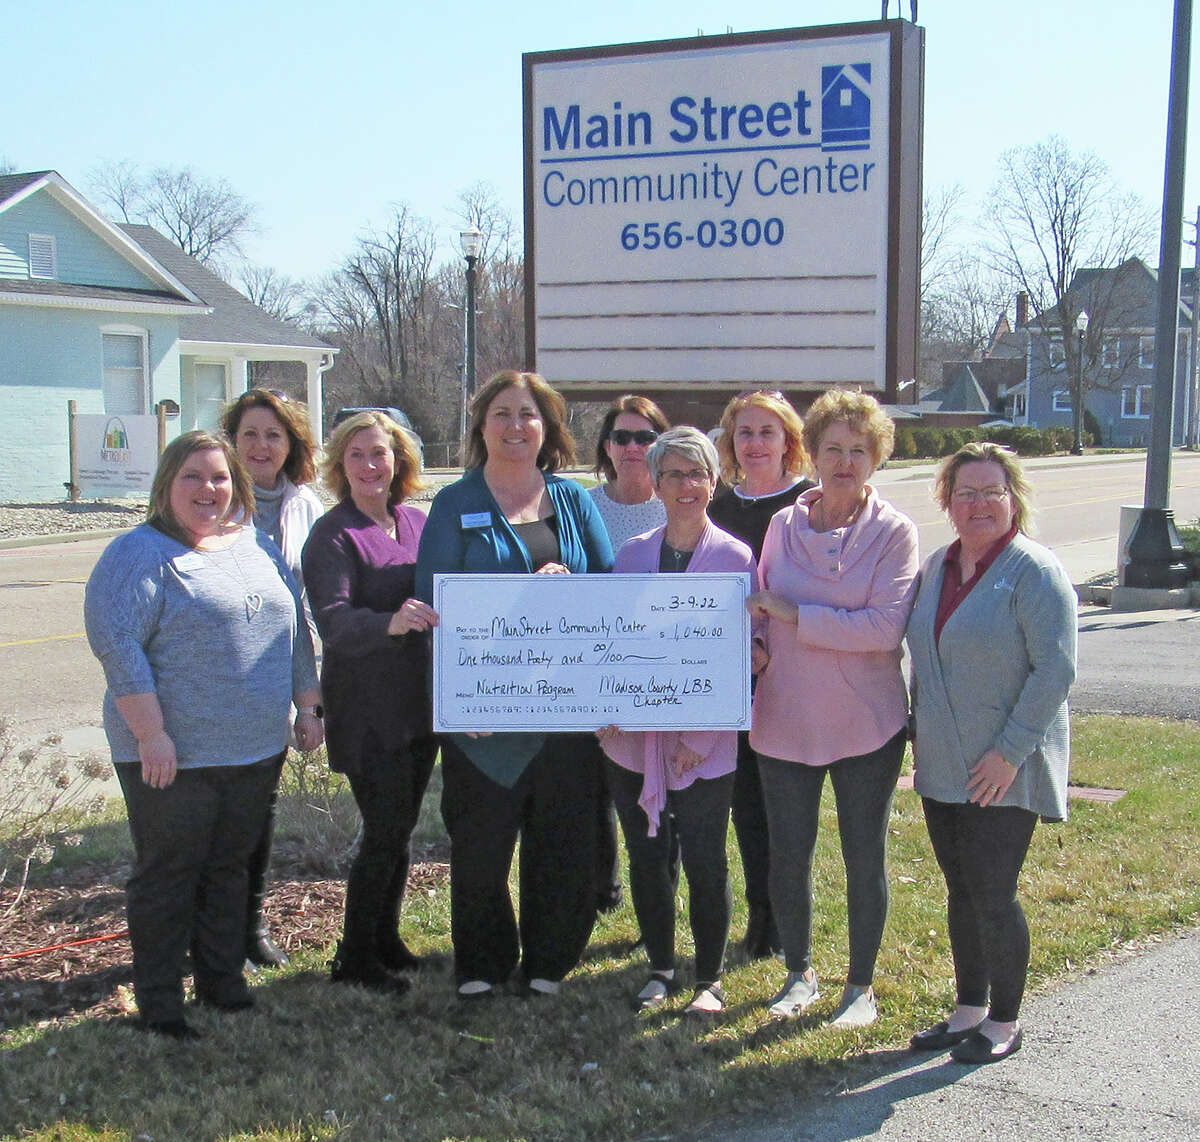 Employees of Main Street Community Center and members of the Madison County chapter of Little Black Book gather outside the center to celebrate Little Black Book’s donation of $1,040 for Main Street’s nutrition program. Front row left to right, Annie Eads, Sara Berkbigler, Valerie Morrisey, Marilyn Schaecher and Lisa Webb. Back row left to right, Teresa Reiniger, Beth Behrhorst, Kimberly Hunt and Brenda Moore.